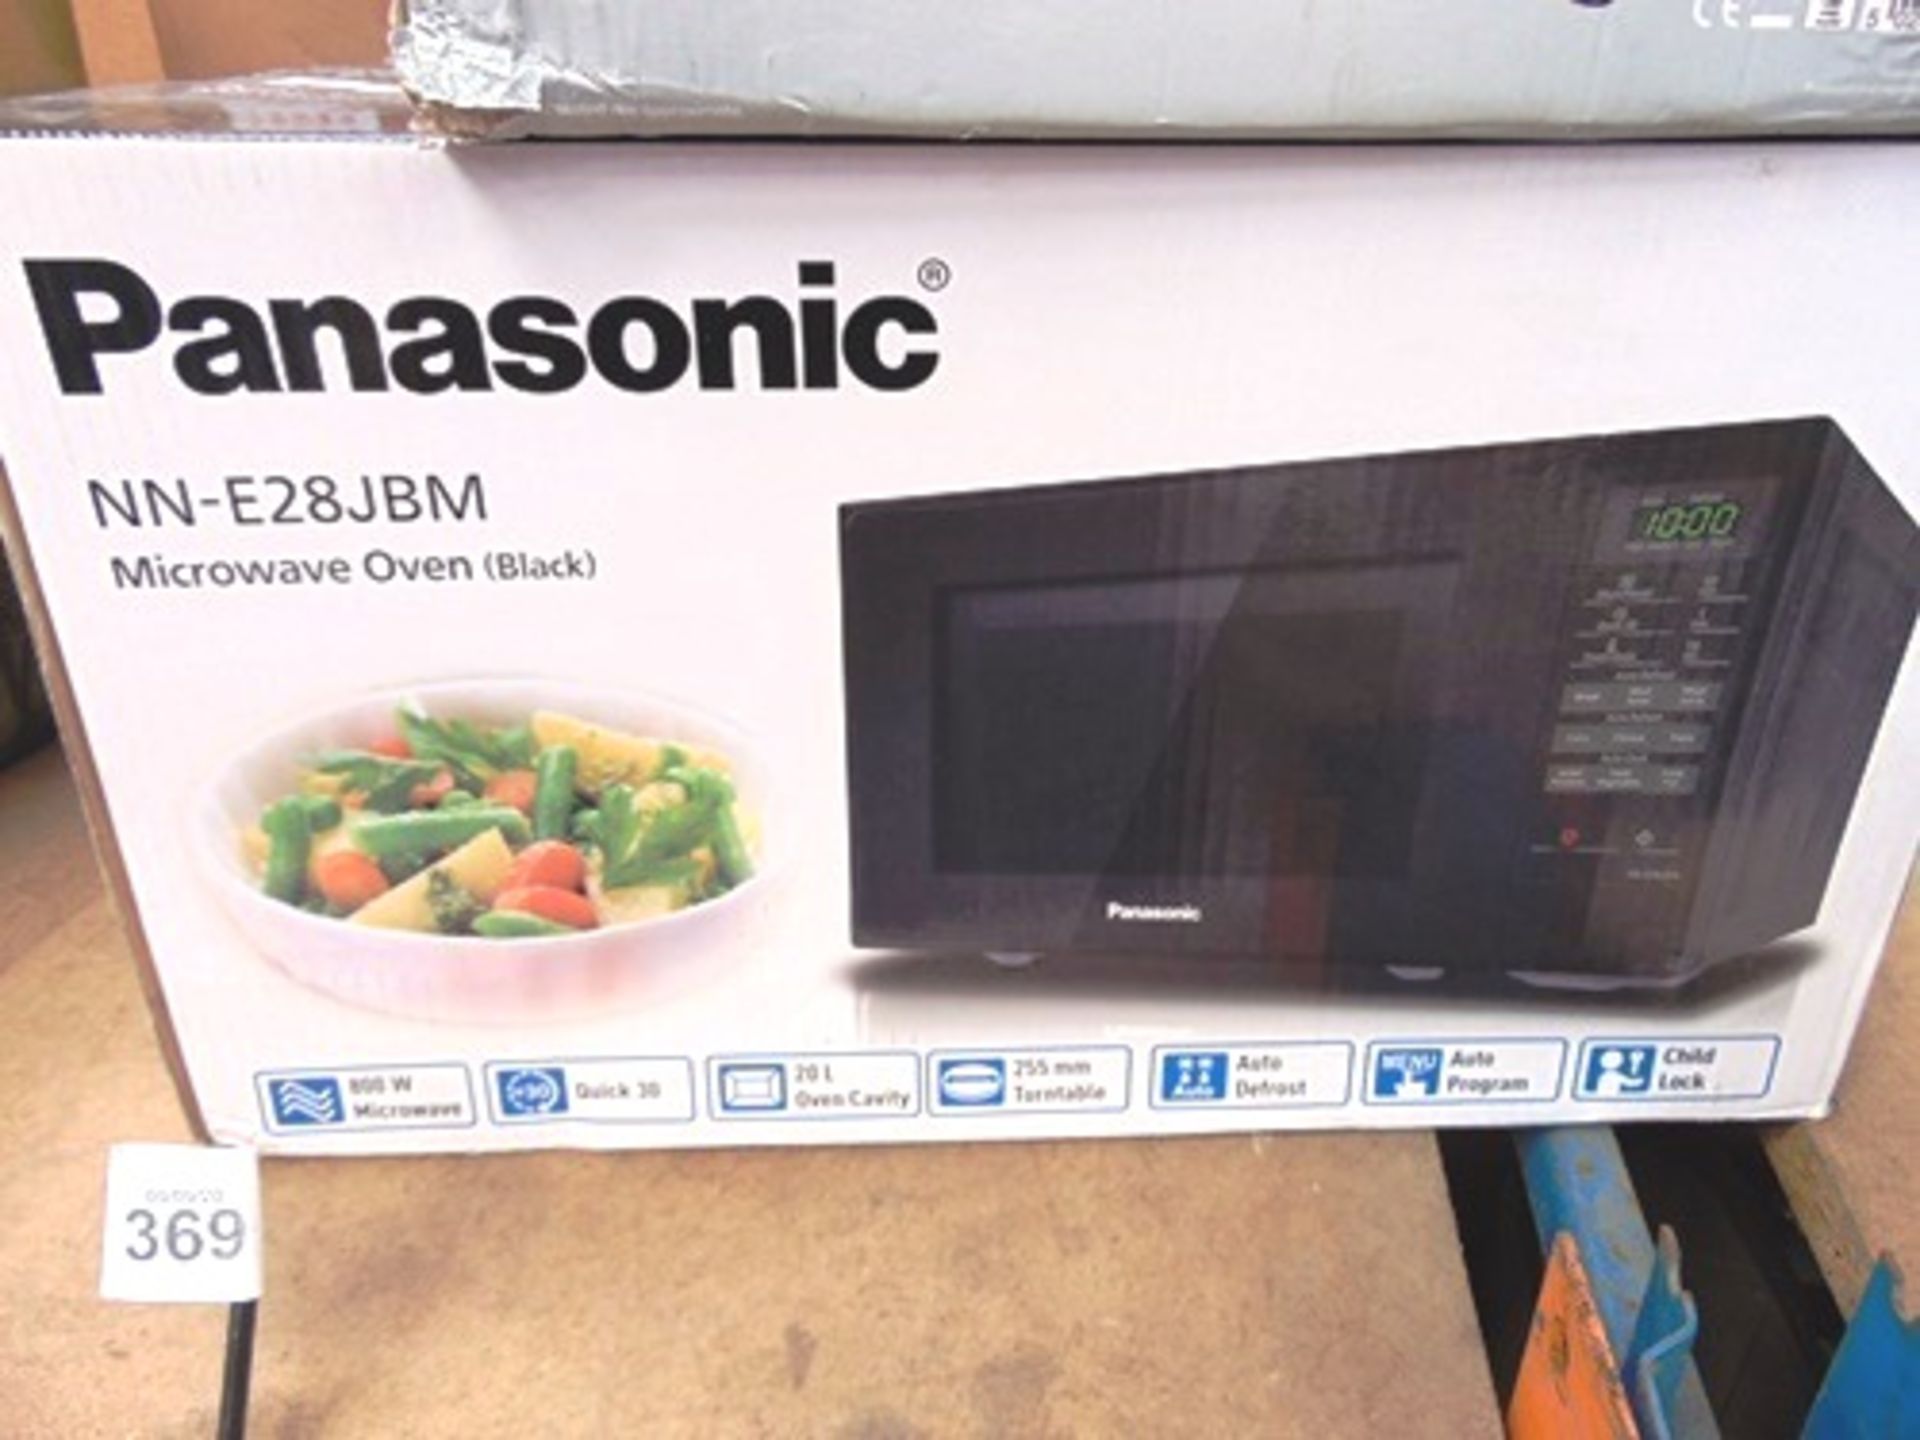 Panasonic 20ltr 800W microwave, model NN-E28JBM, together with a Daewoo halogen 17ltr air fryer, - Image 3 of 5